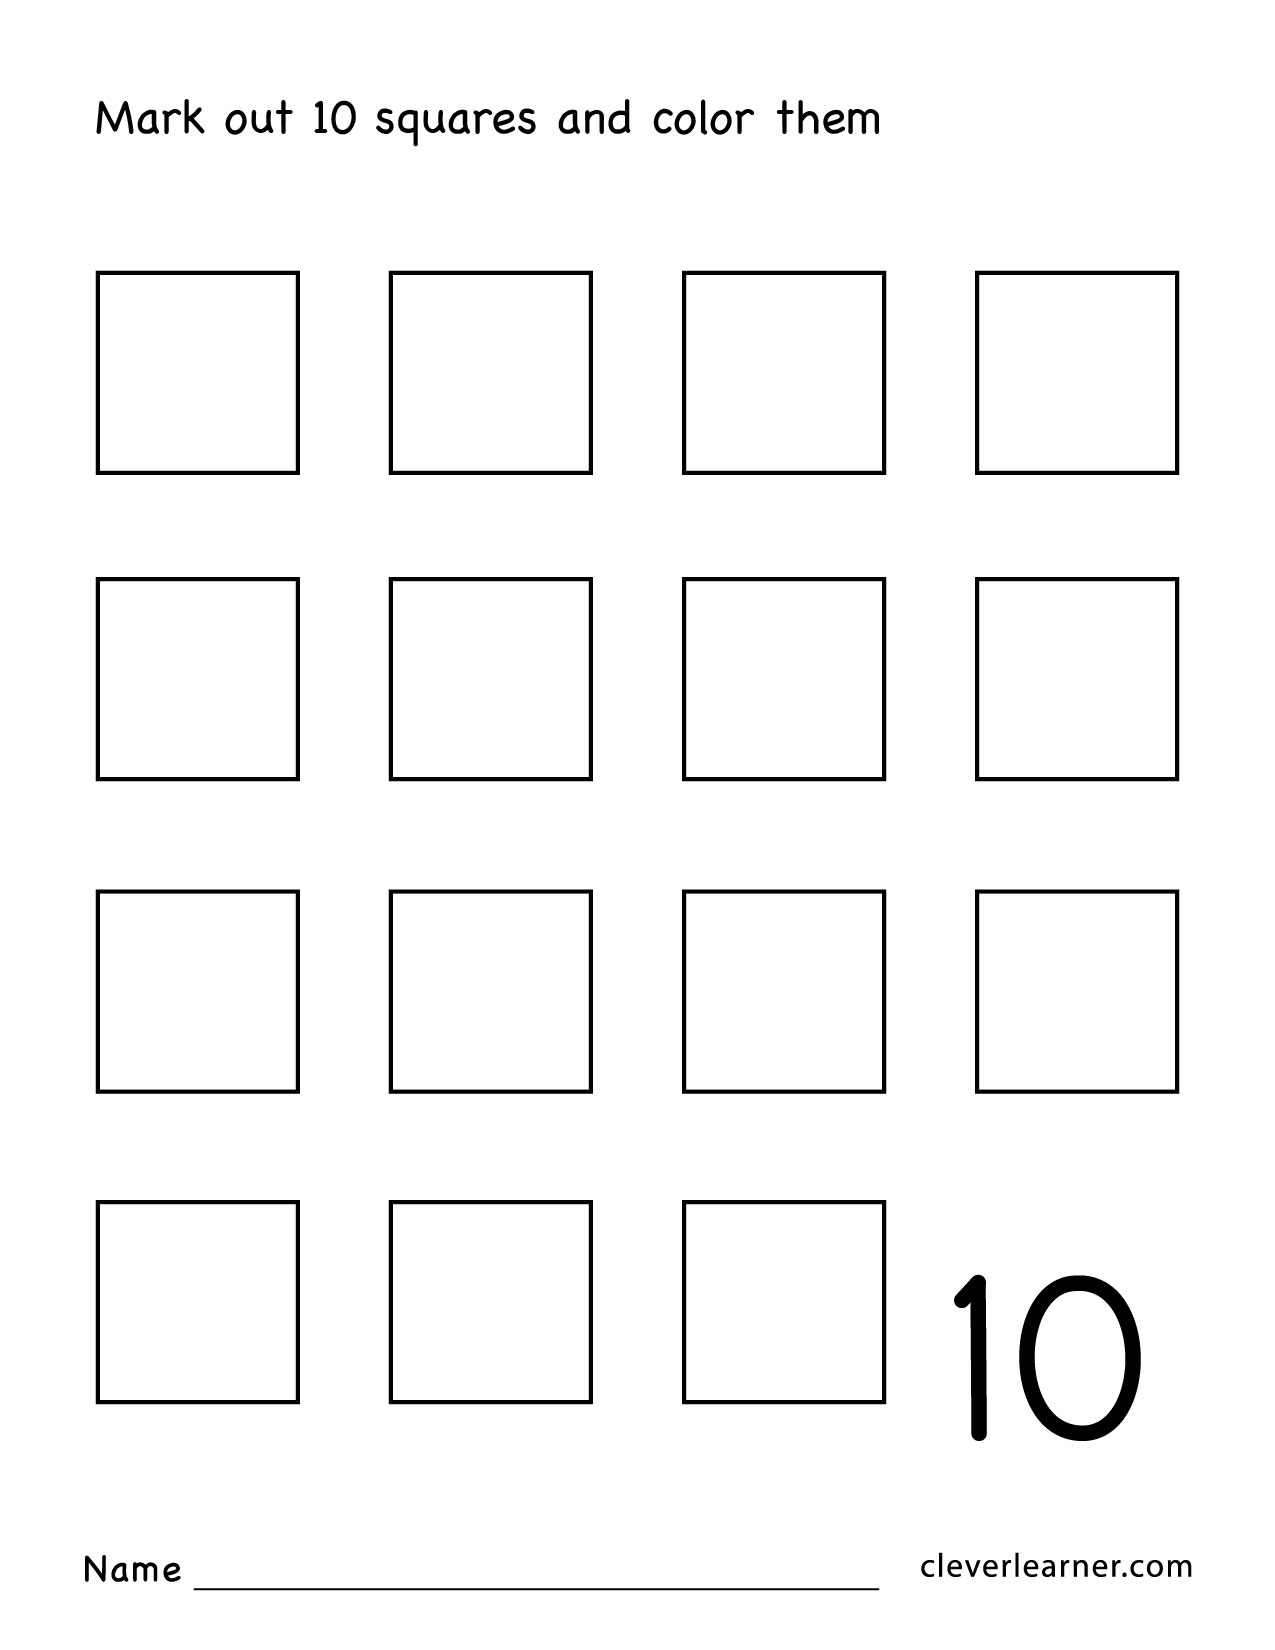 Number ten writing, counting and identification printable worksheets